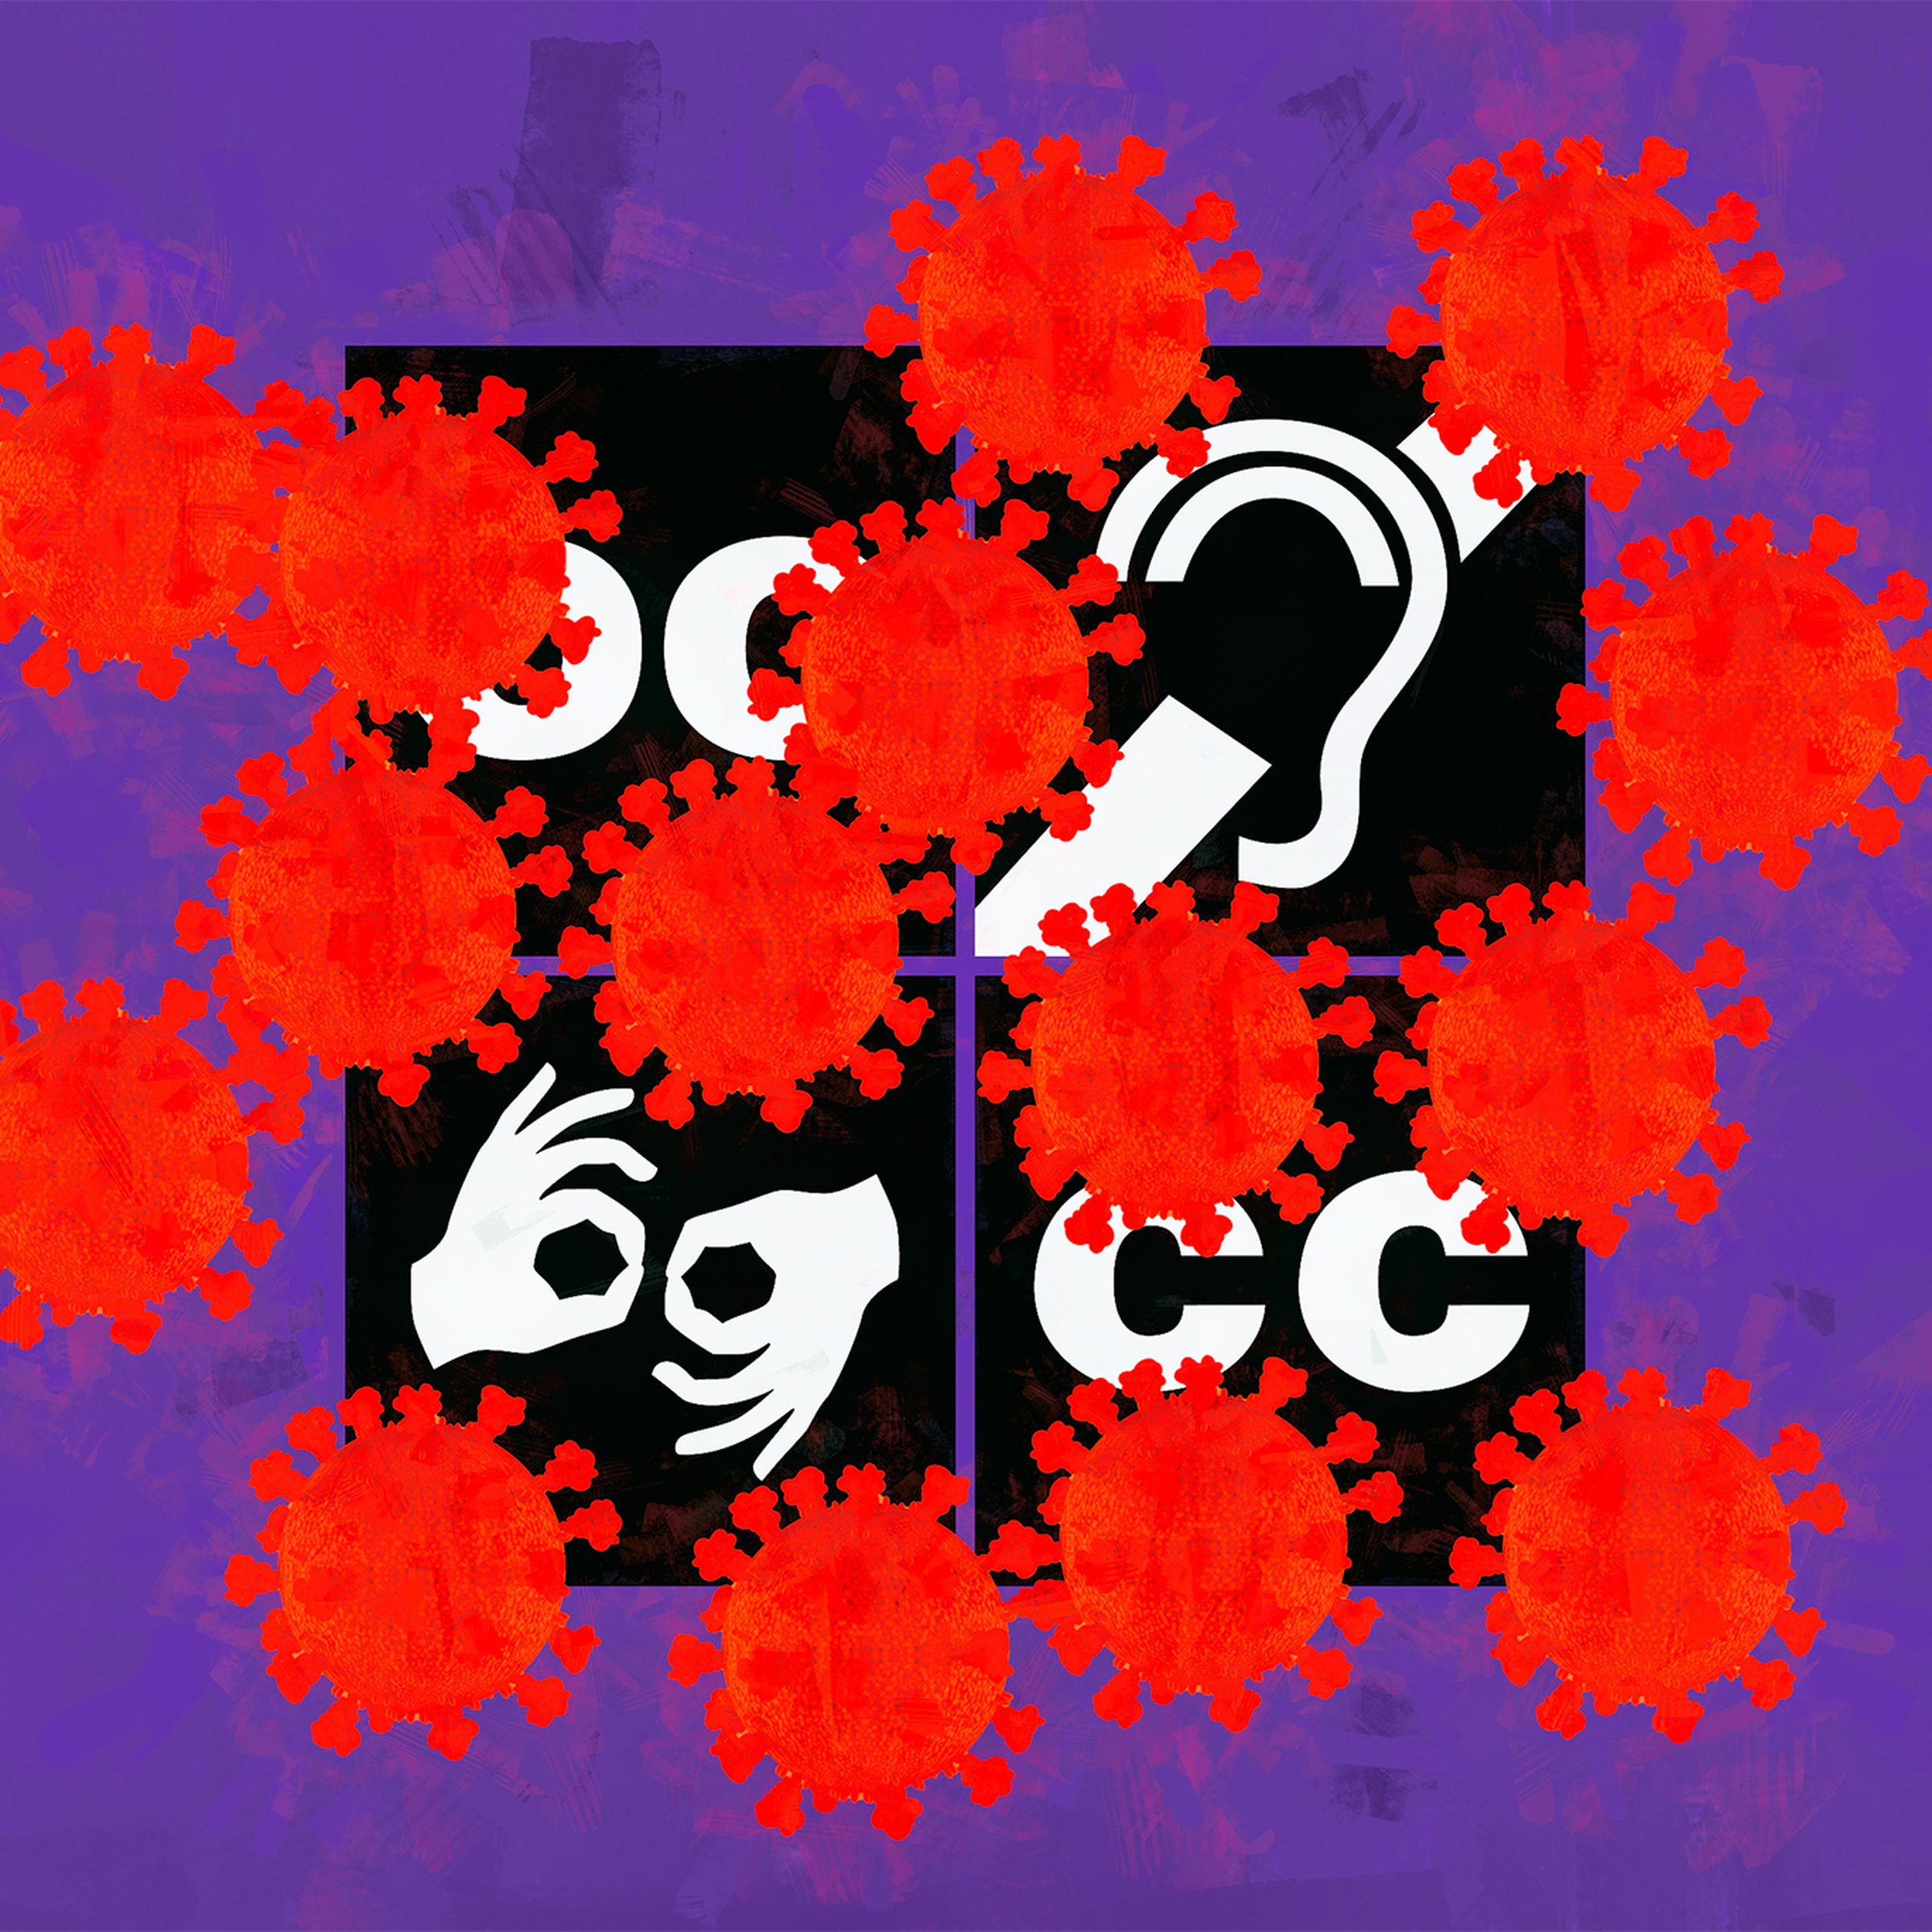 A collage with a purple background, showing four black squares with accessibility symbols on them, including the symbols for open captions, hearing loop, ASL interpreting, and closed captions. Partially blocking the symbols are simplified red coronavirus molecules.